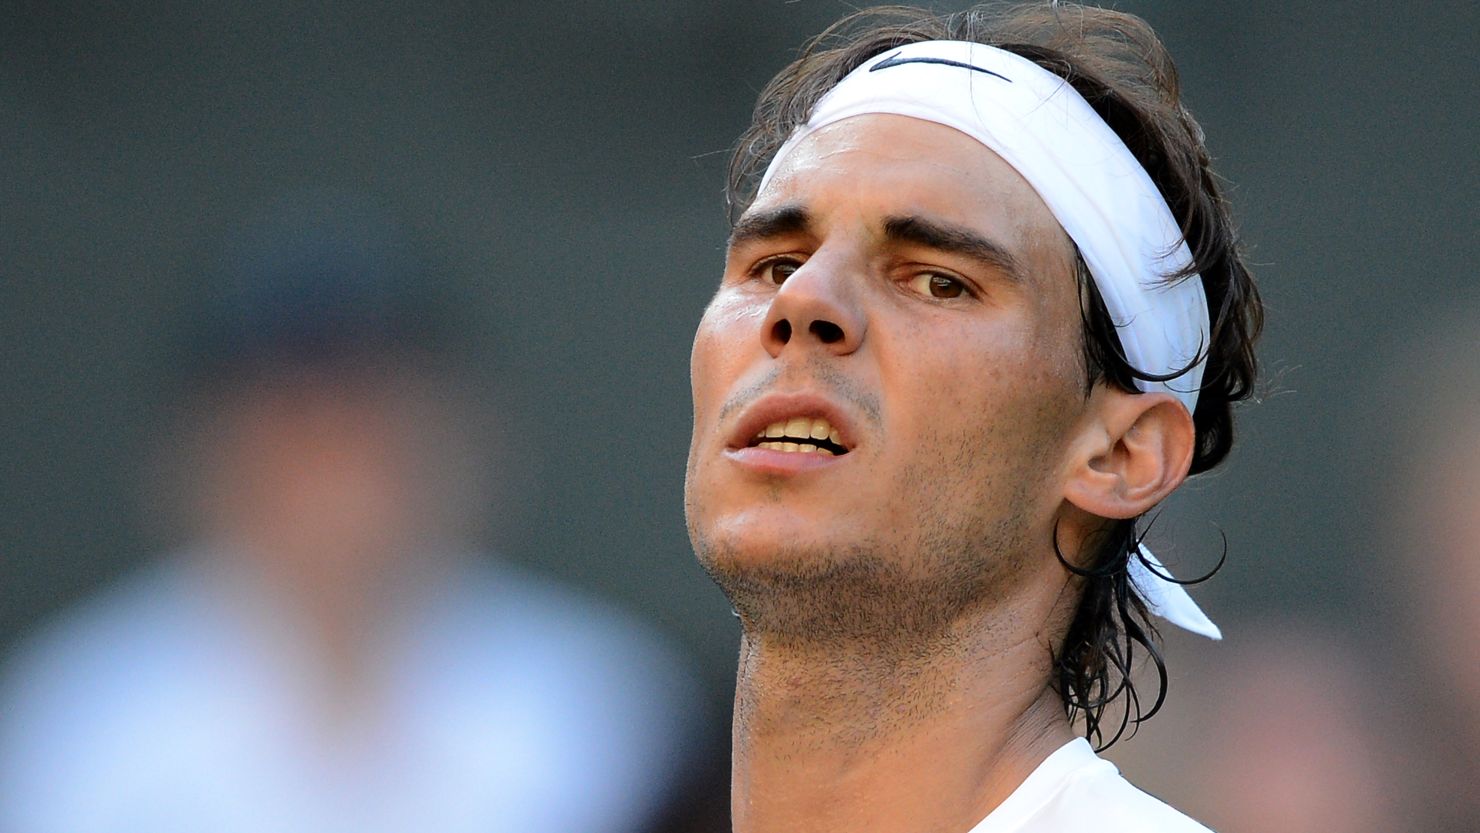 Nadal has not played since a surprise early exit at this year's Wimbledon.